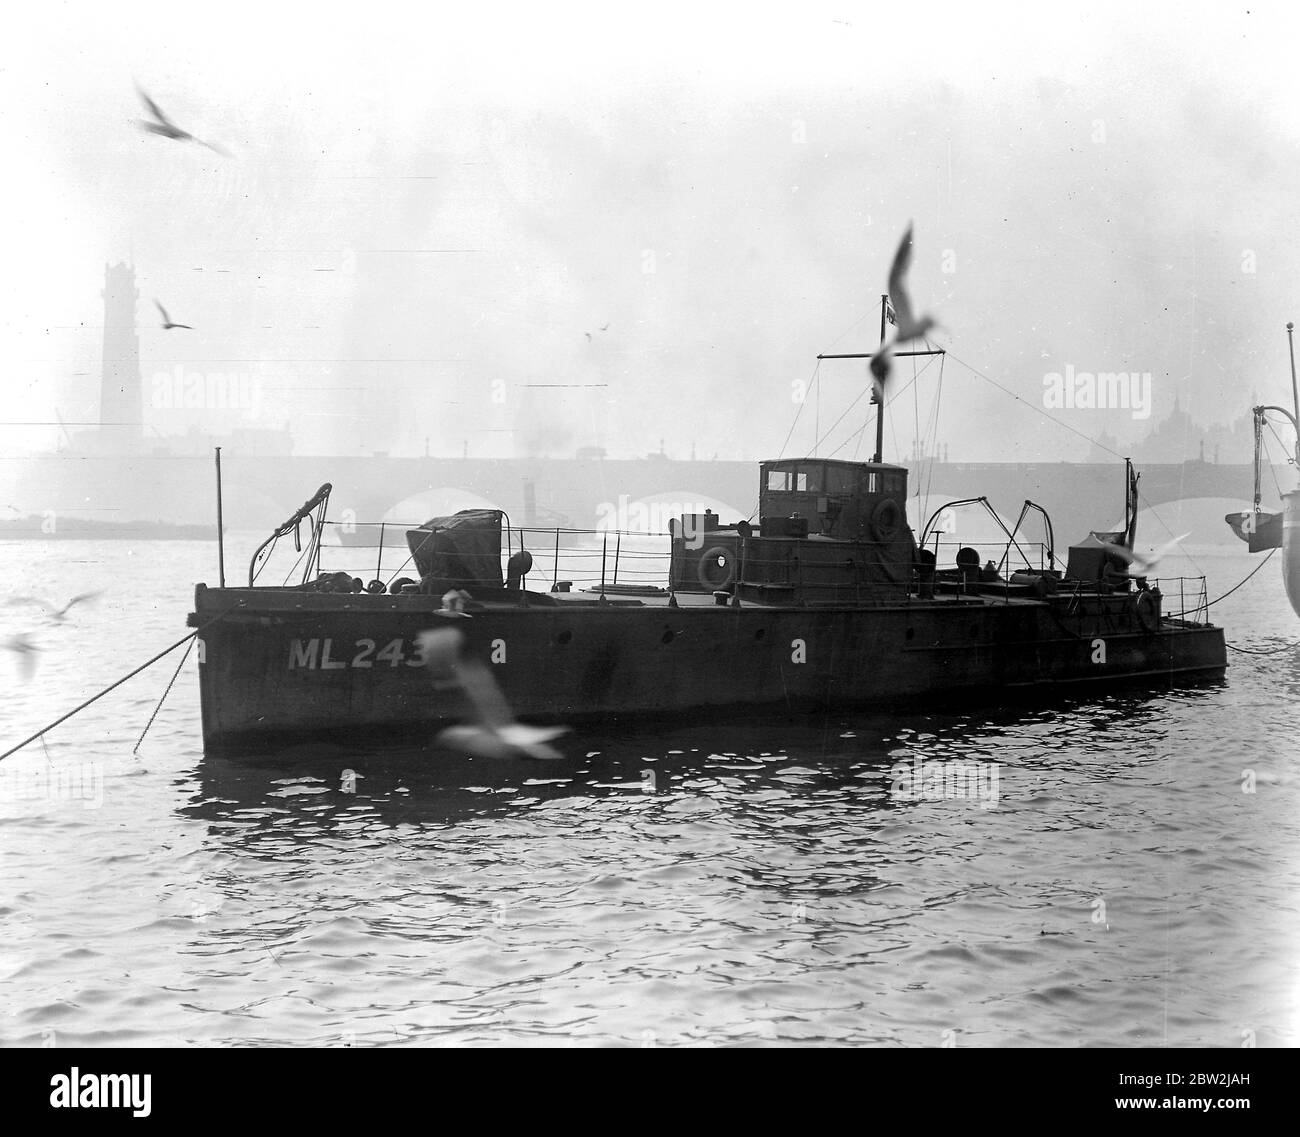 The M.L.243 presented by the Admiralty to the Ashdown Sea Scouts for instructional purposes. 26 May 1941 Stock Photo